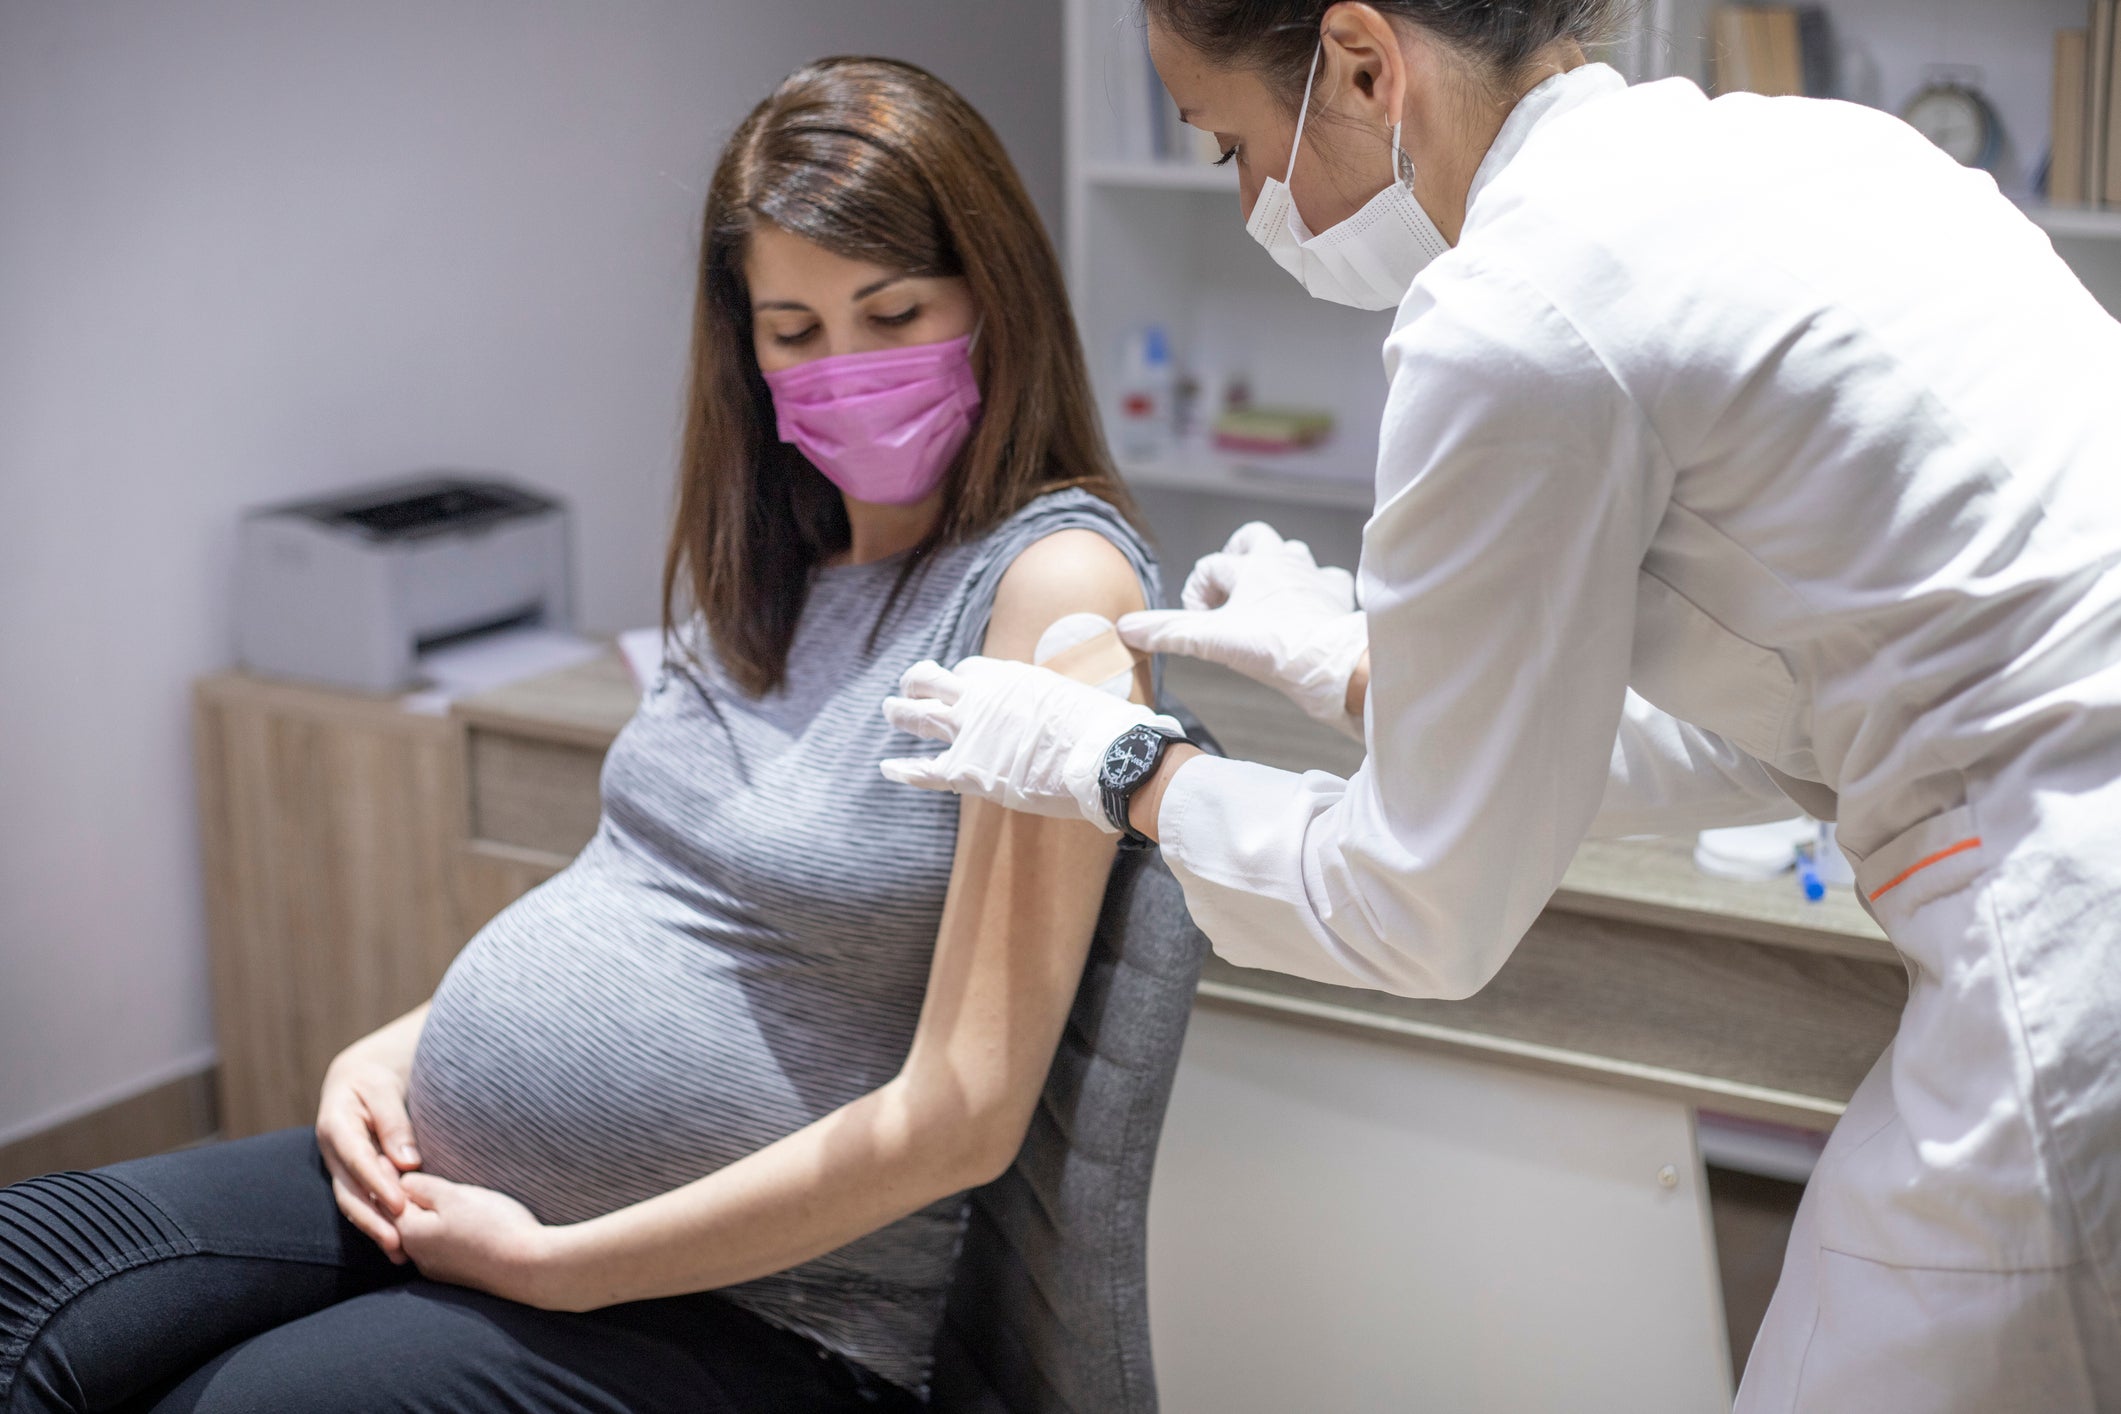 The study further builds the case for pregnant women to get the shots